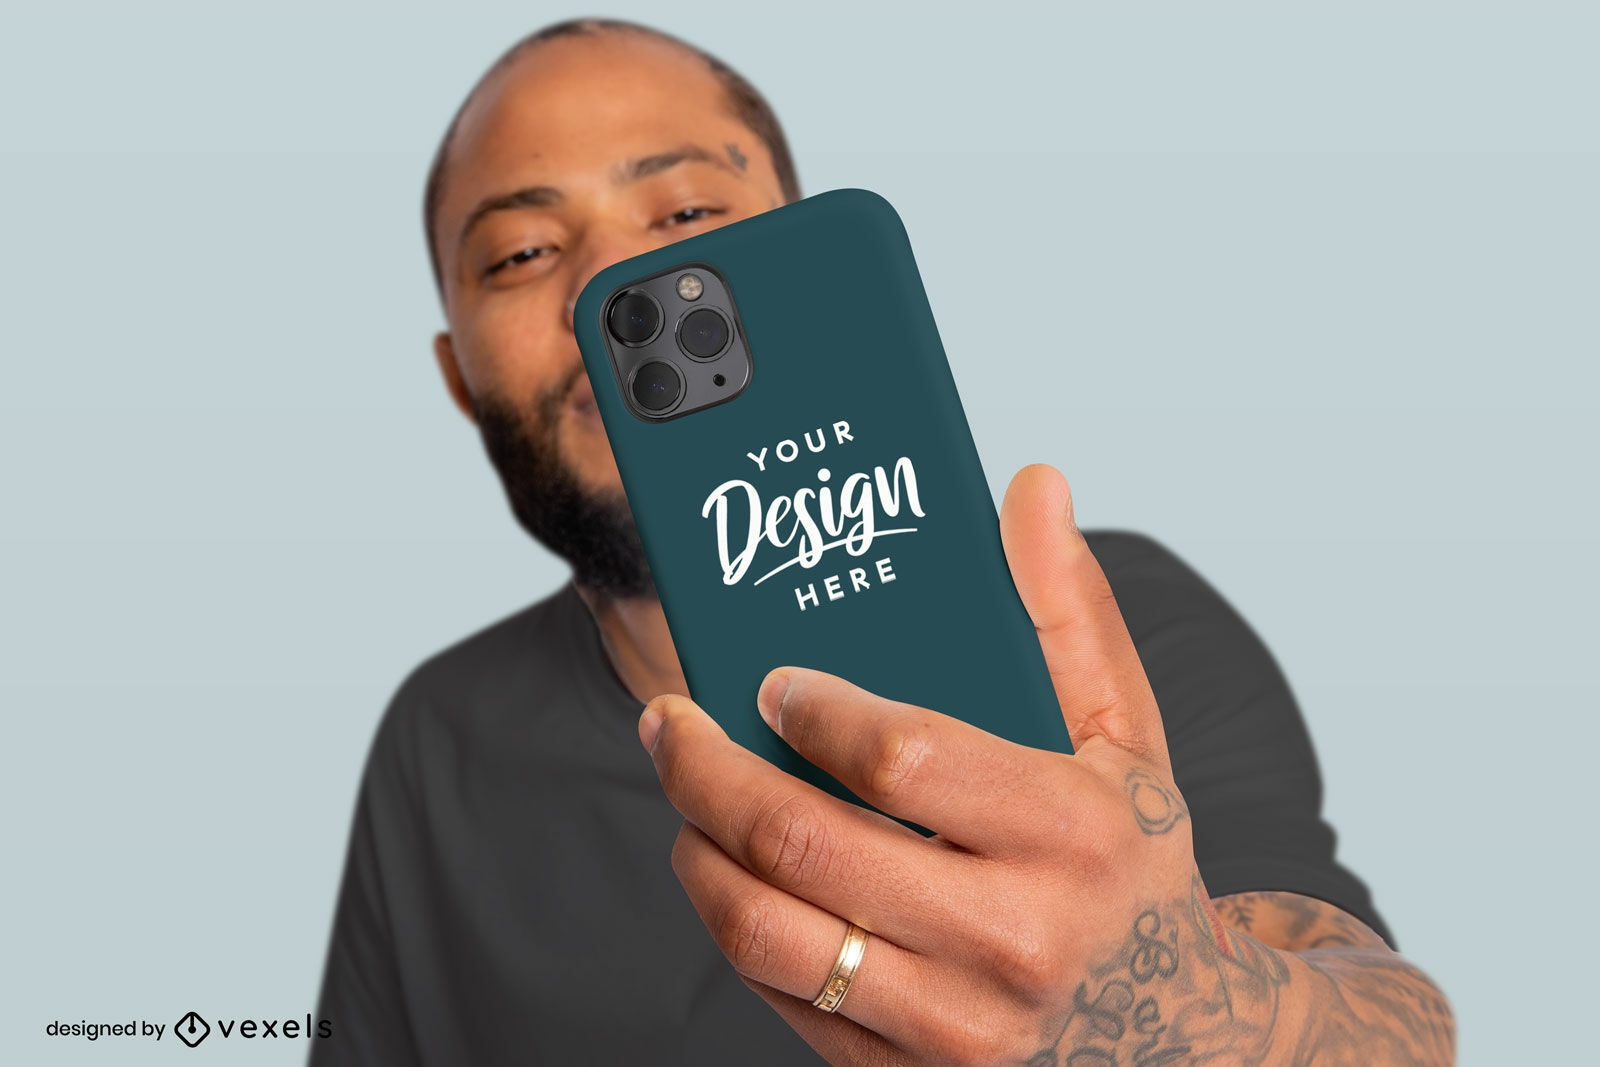 Black man with tattoos holding phone case